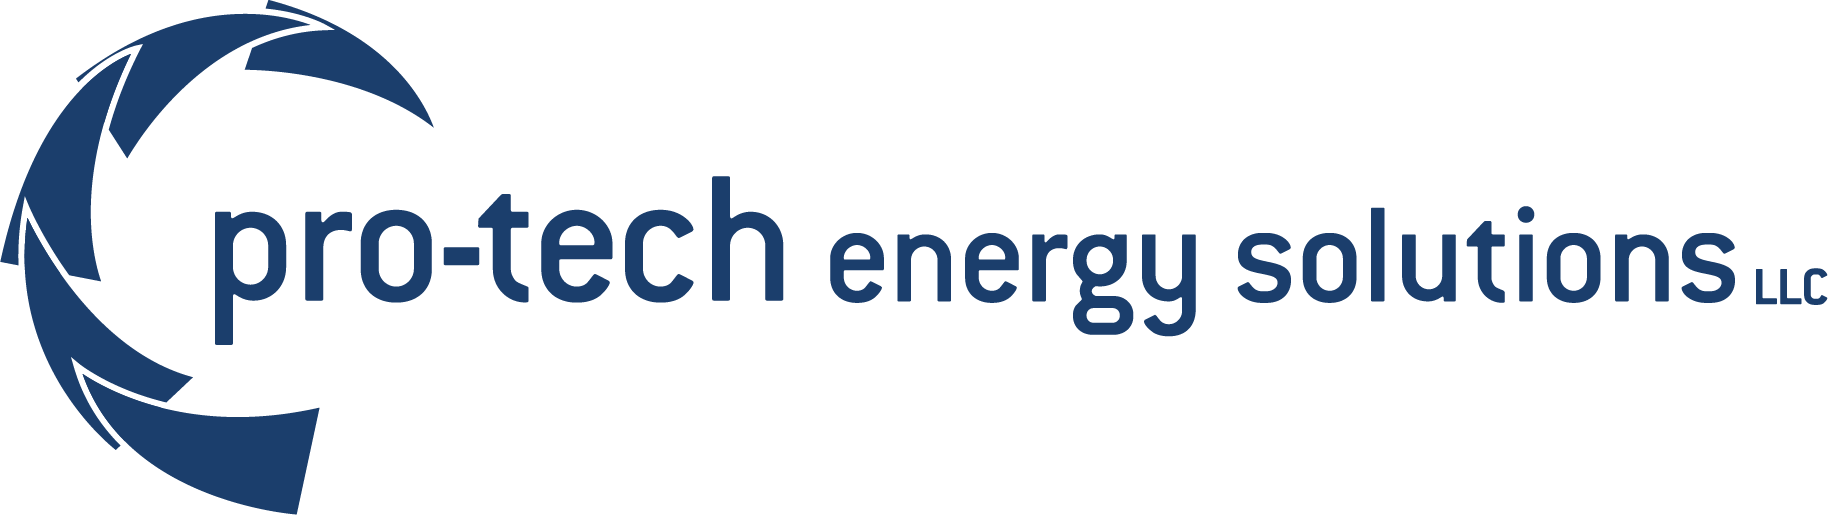 Pro-tech Energy Solutions